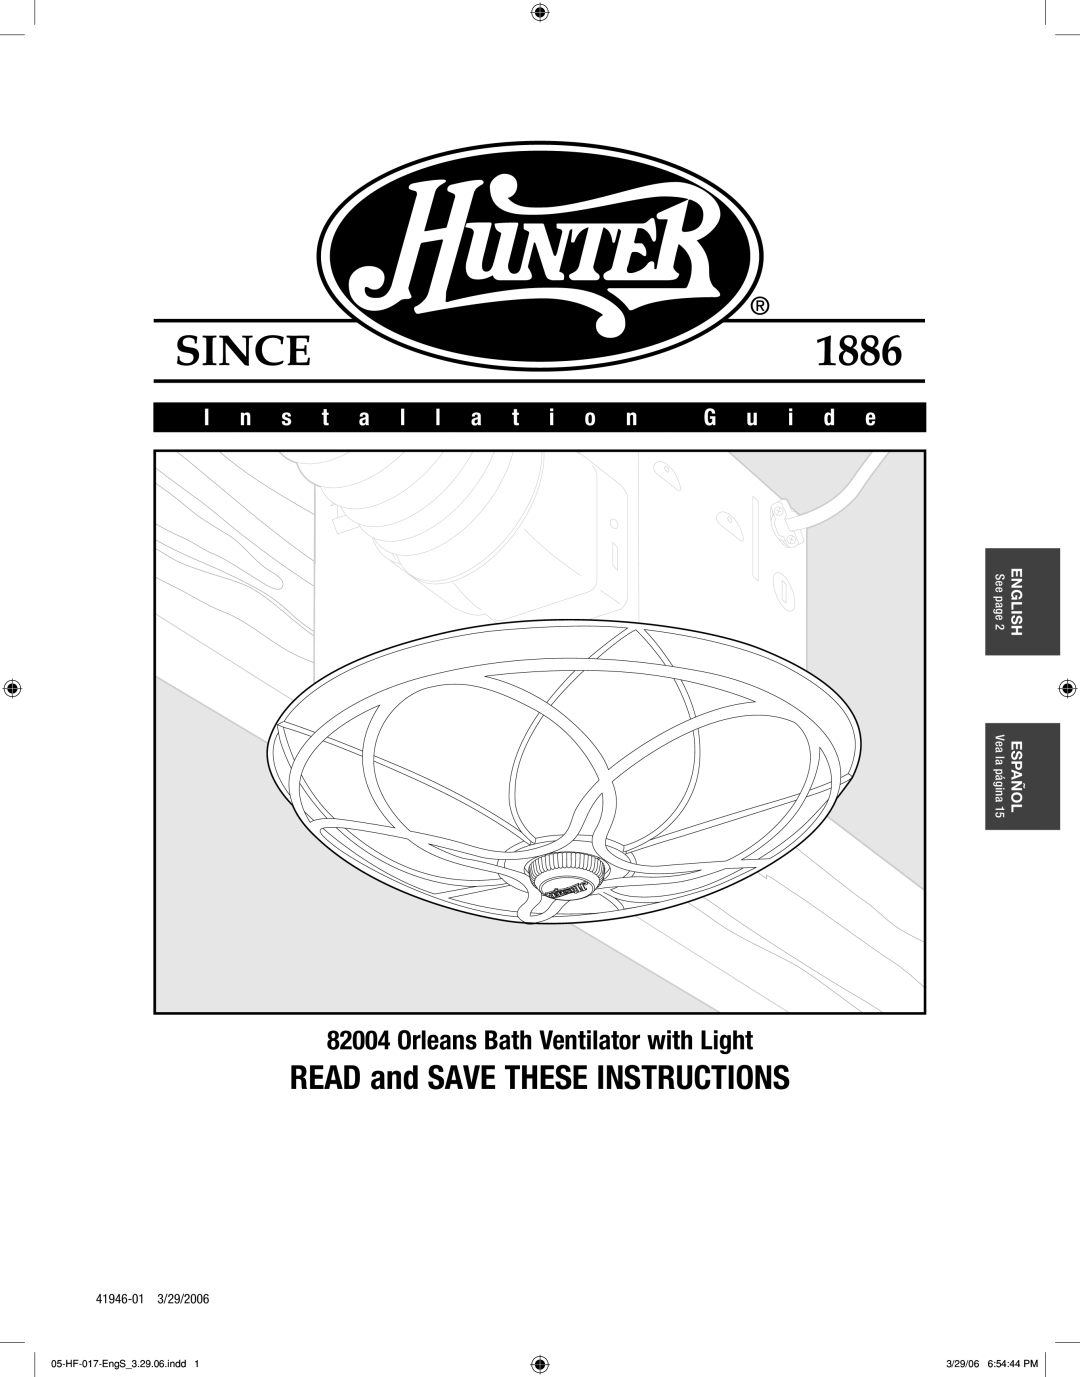 Hunter Fan 82004 manual READ and SAVE THESE INSTRUCTIONS, Orleans Bath Ventilator with Light, I n s t a l l a t i o n 